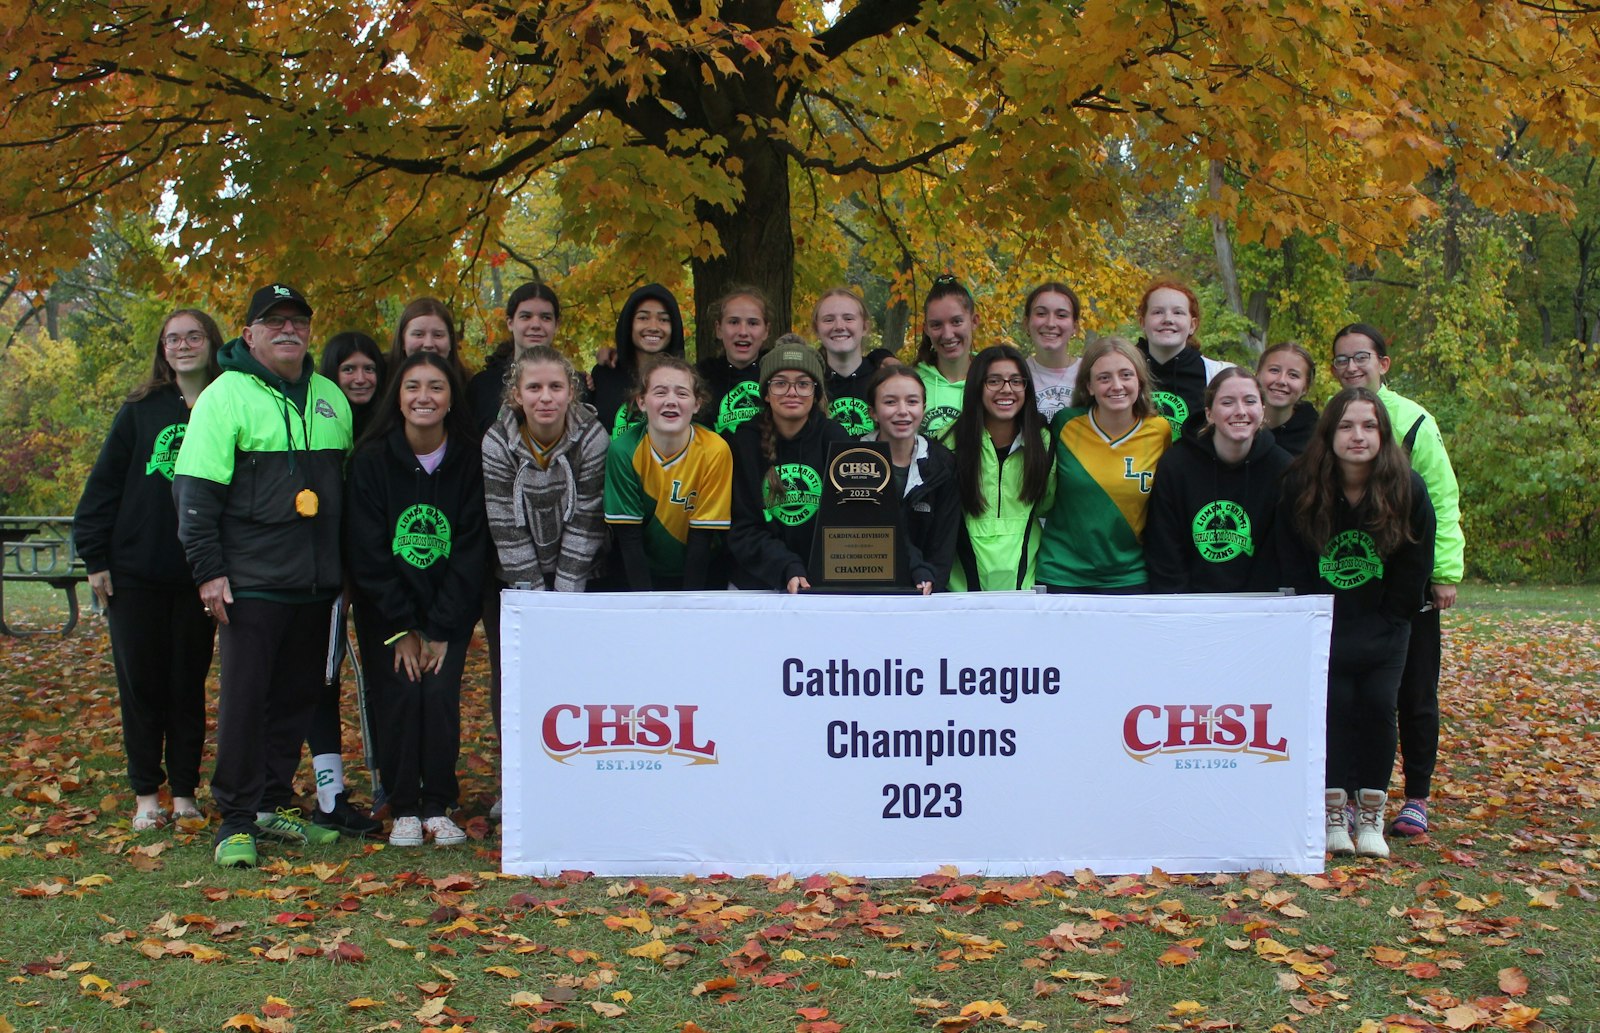 With five finishers in the top 10, Jackson Lumen Christi was the clear winner of the girls’ Catholic League Cardinal Division cross-country title. Madison Osterberg, Samantha Schroeder, Macy Fazekas, Sydney Fazekas and Thia Tello were the team’s top five runners.